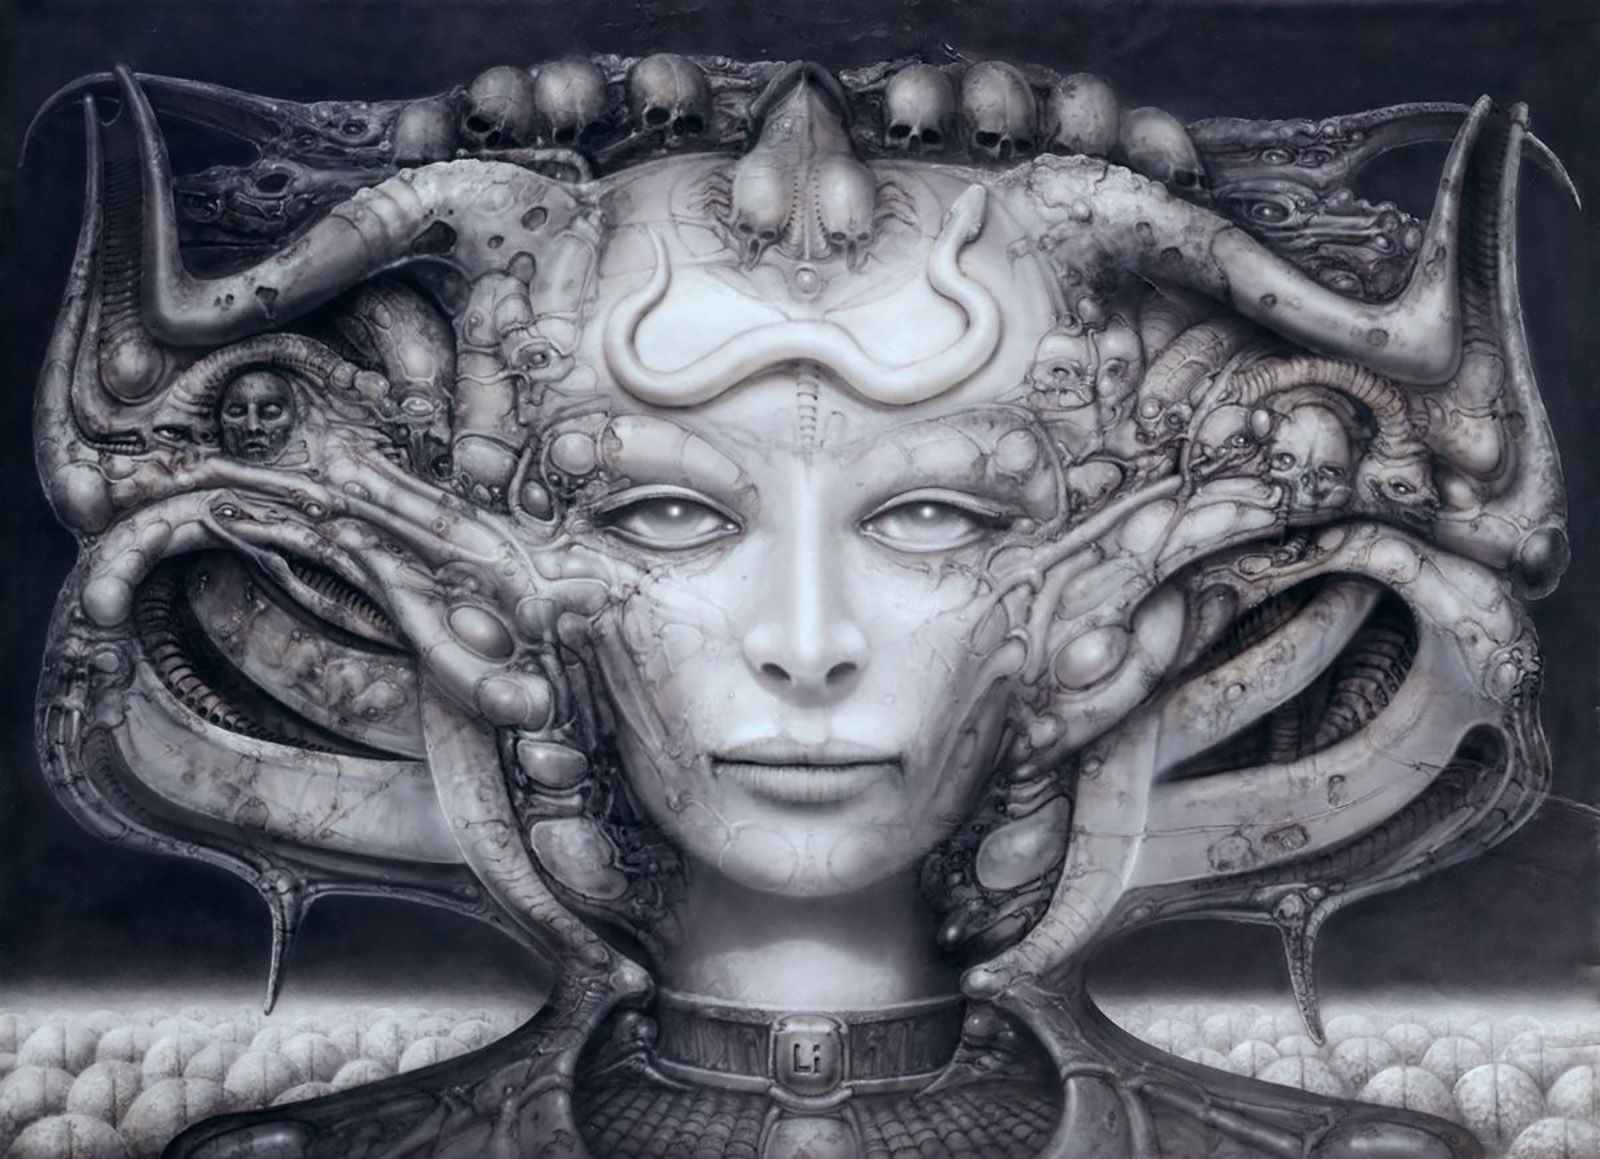 Top 999+ giger images – Amazing Collection giger images Full 4K